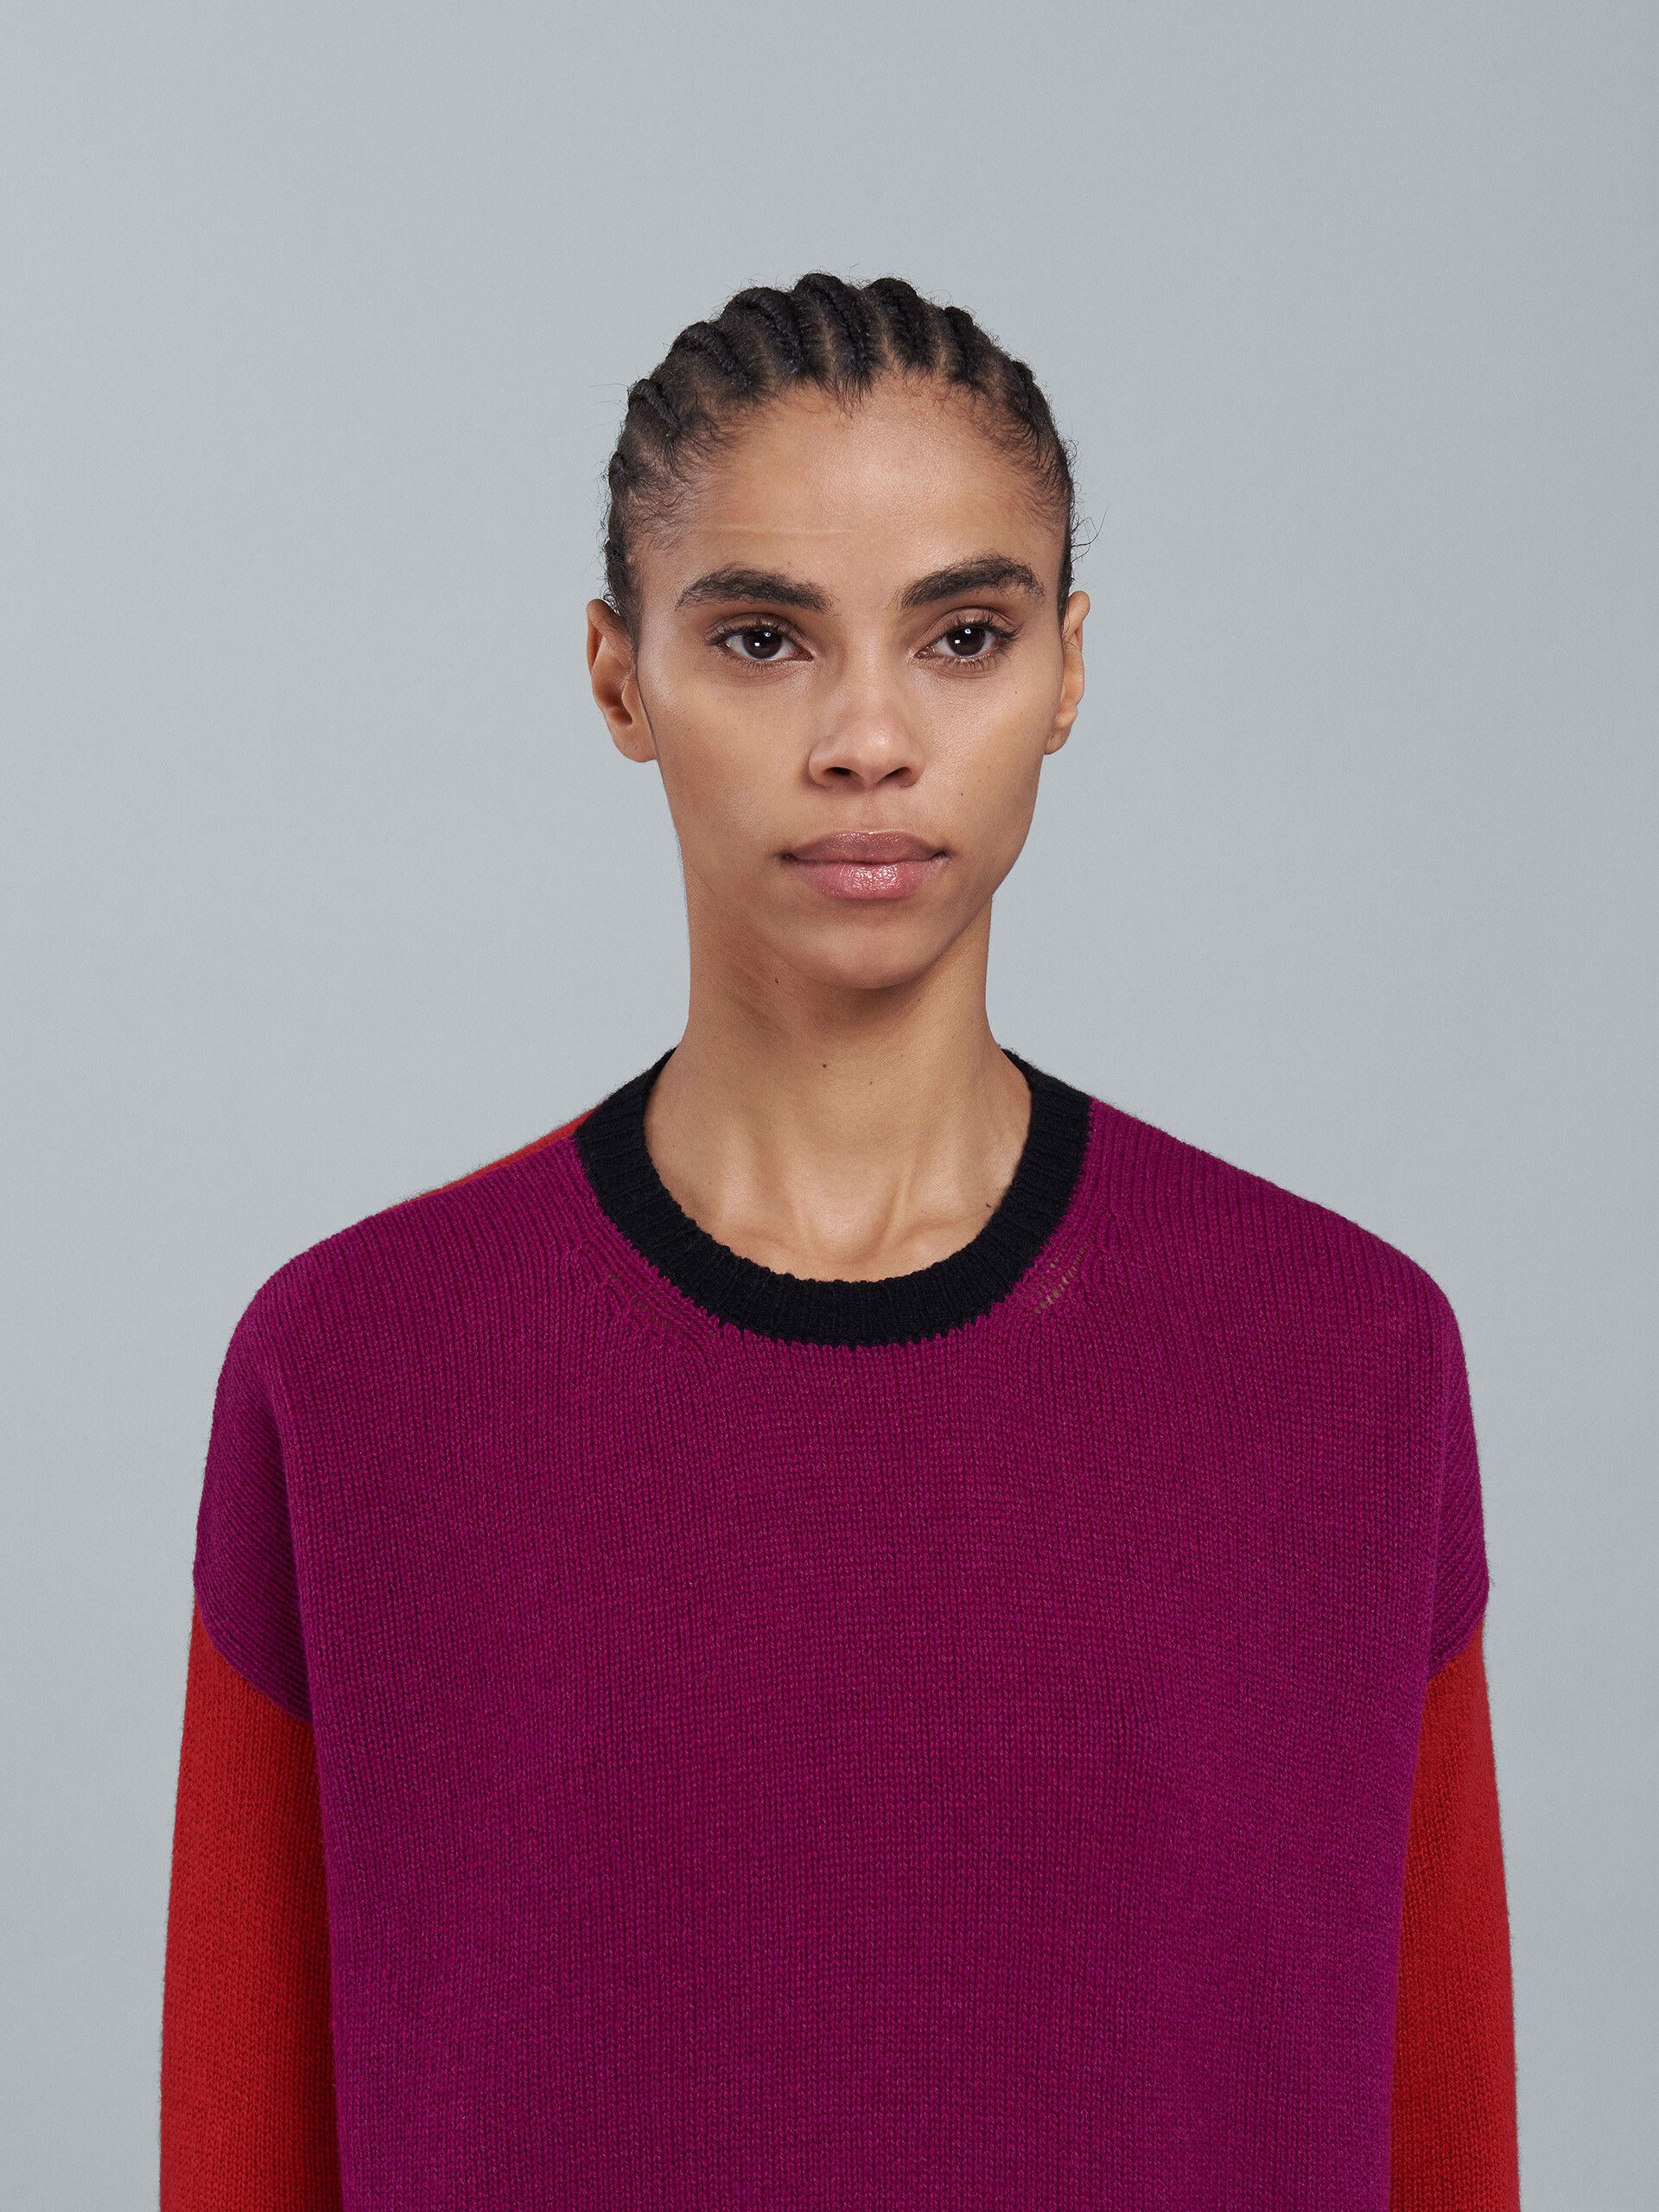 Pink cashmere crewneck sweater - Pullovers - Image 4